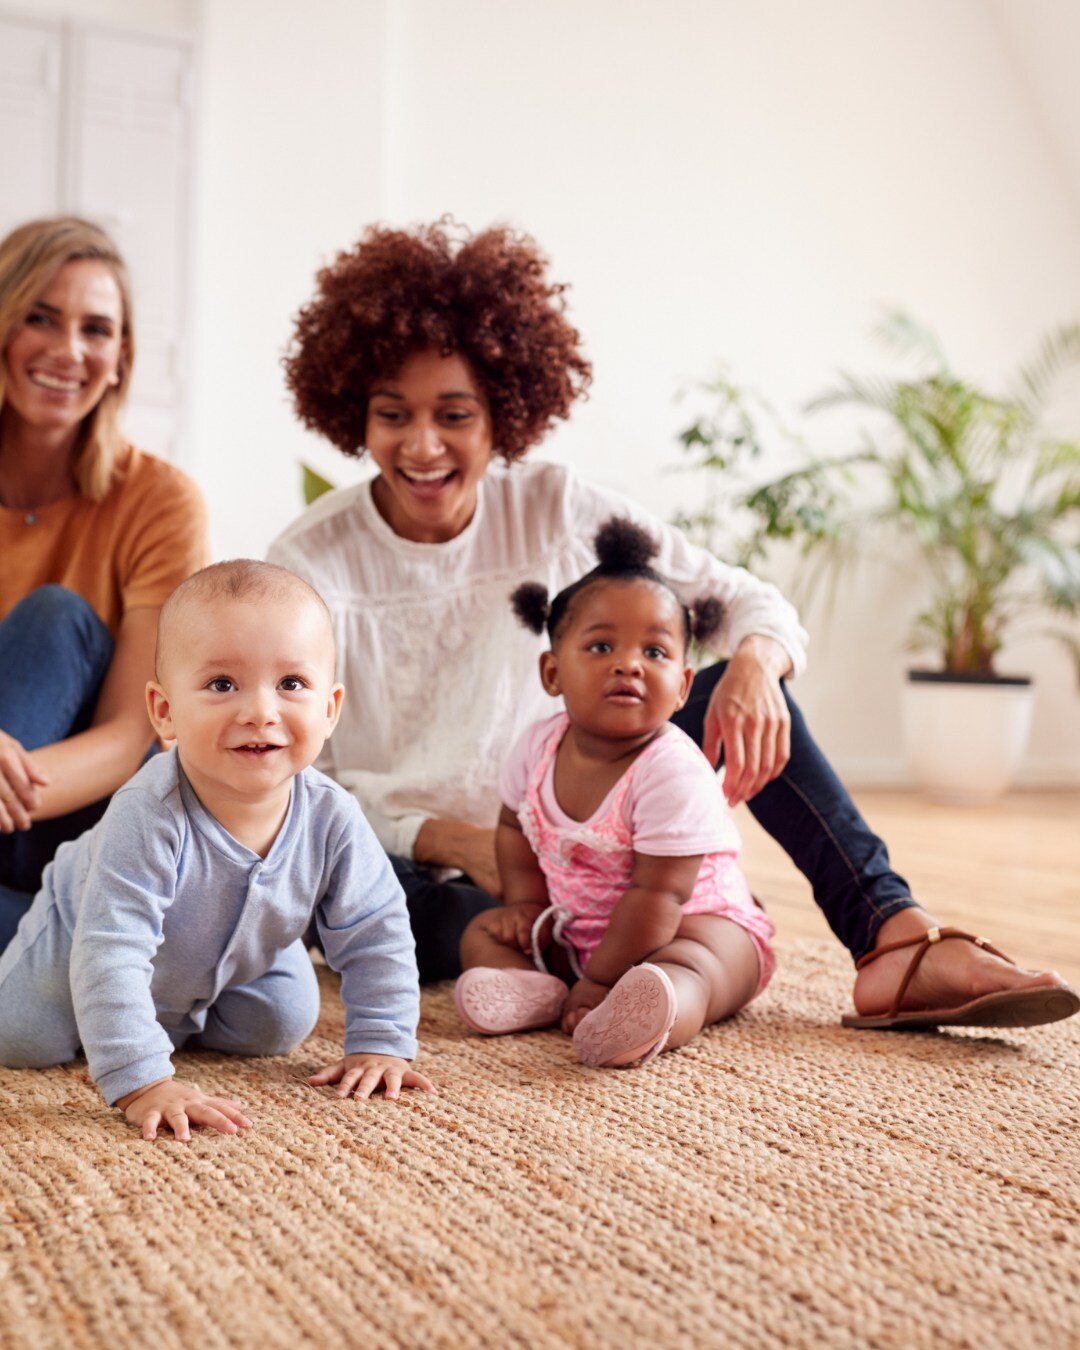 Finding Community Postpartum 🌟💕

Welcoming a new baby into your life is a transformative experience, but it can also be overwhelming. Building a supportive community can make a world of difference as you navigate the joys and challenges of postpart